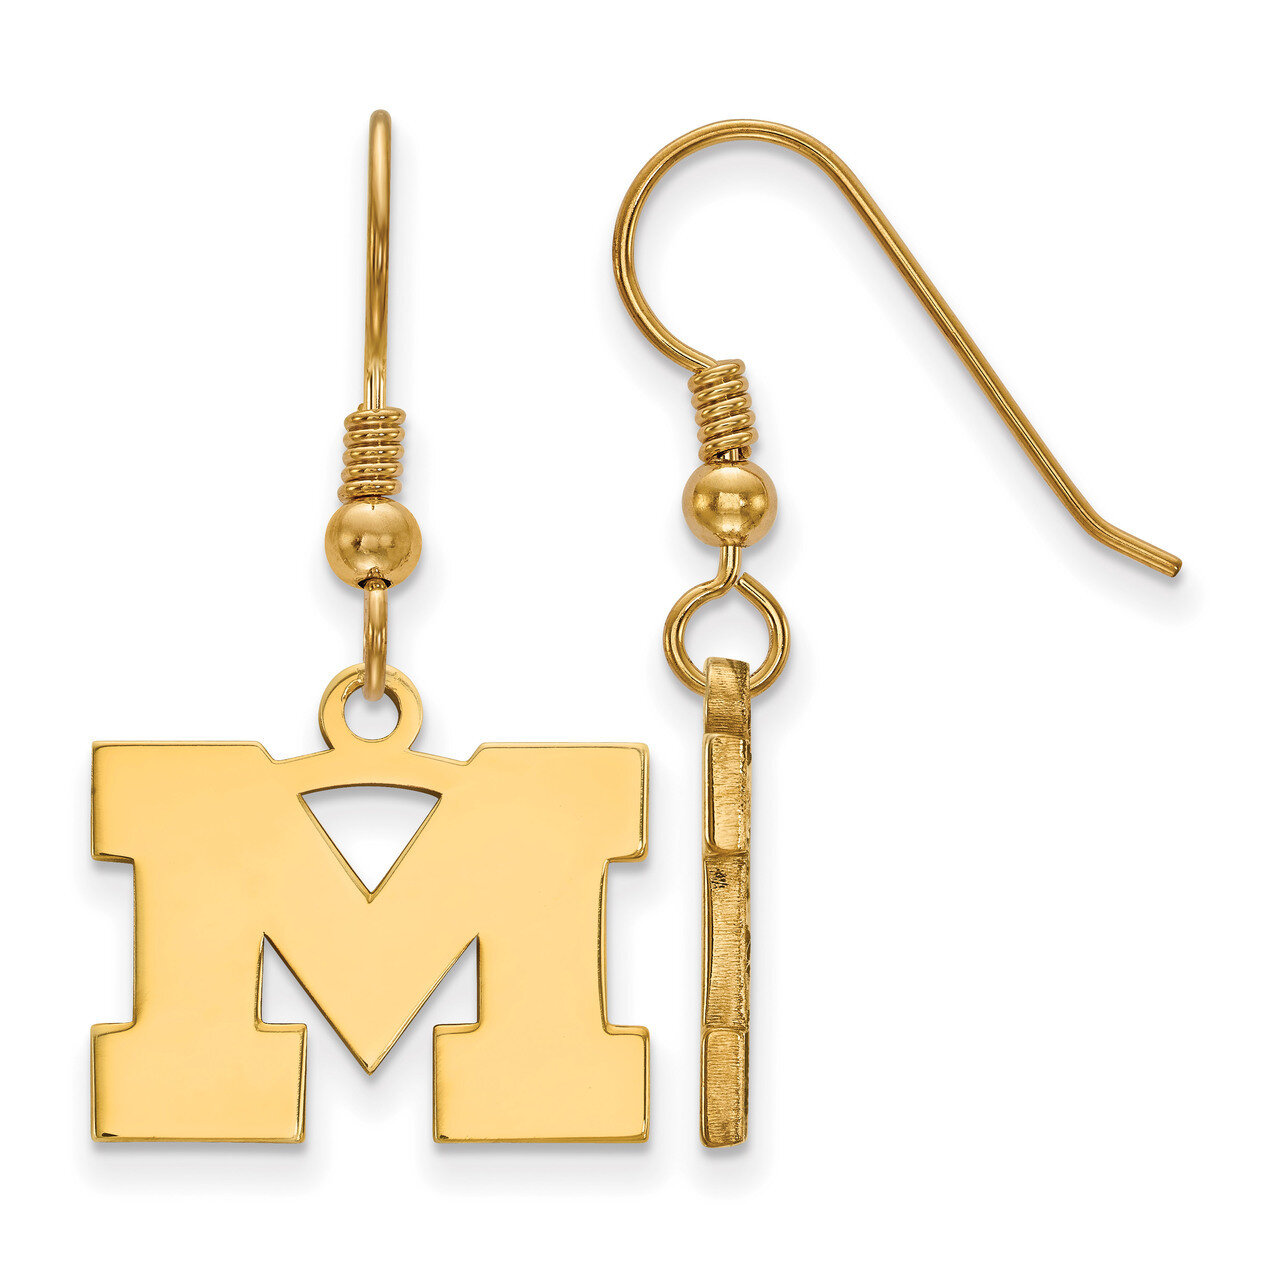 Michigan University of Small Dangle Earrings Gold-plated Sterling Silver GP007UM